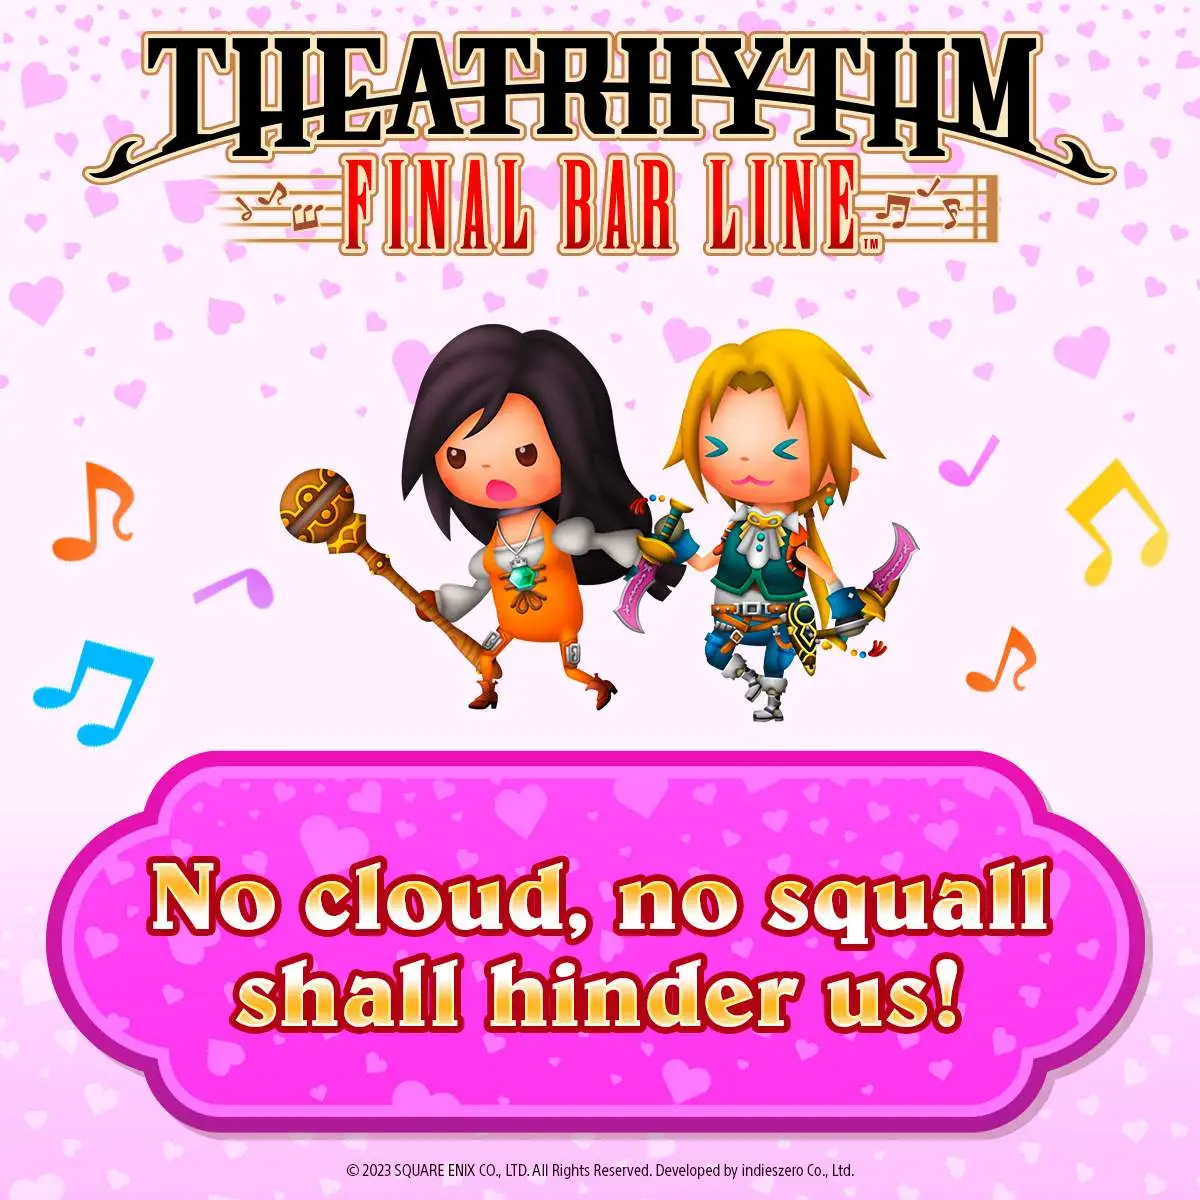 Theatrhythm Final Bar Line Final Fantasy Character Valentine’s Day Cards Get Silly